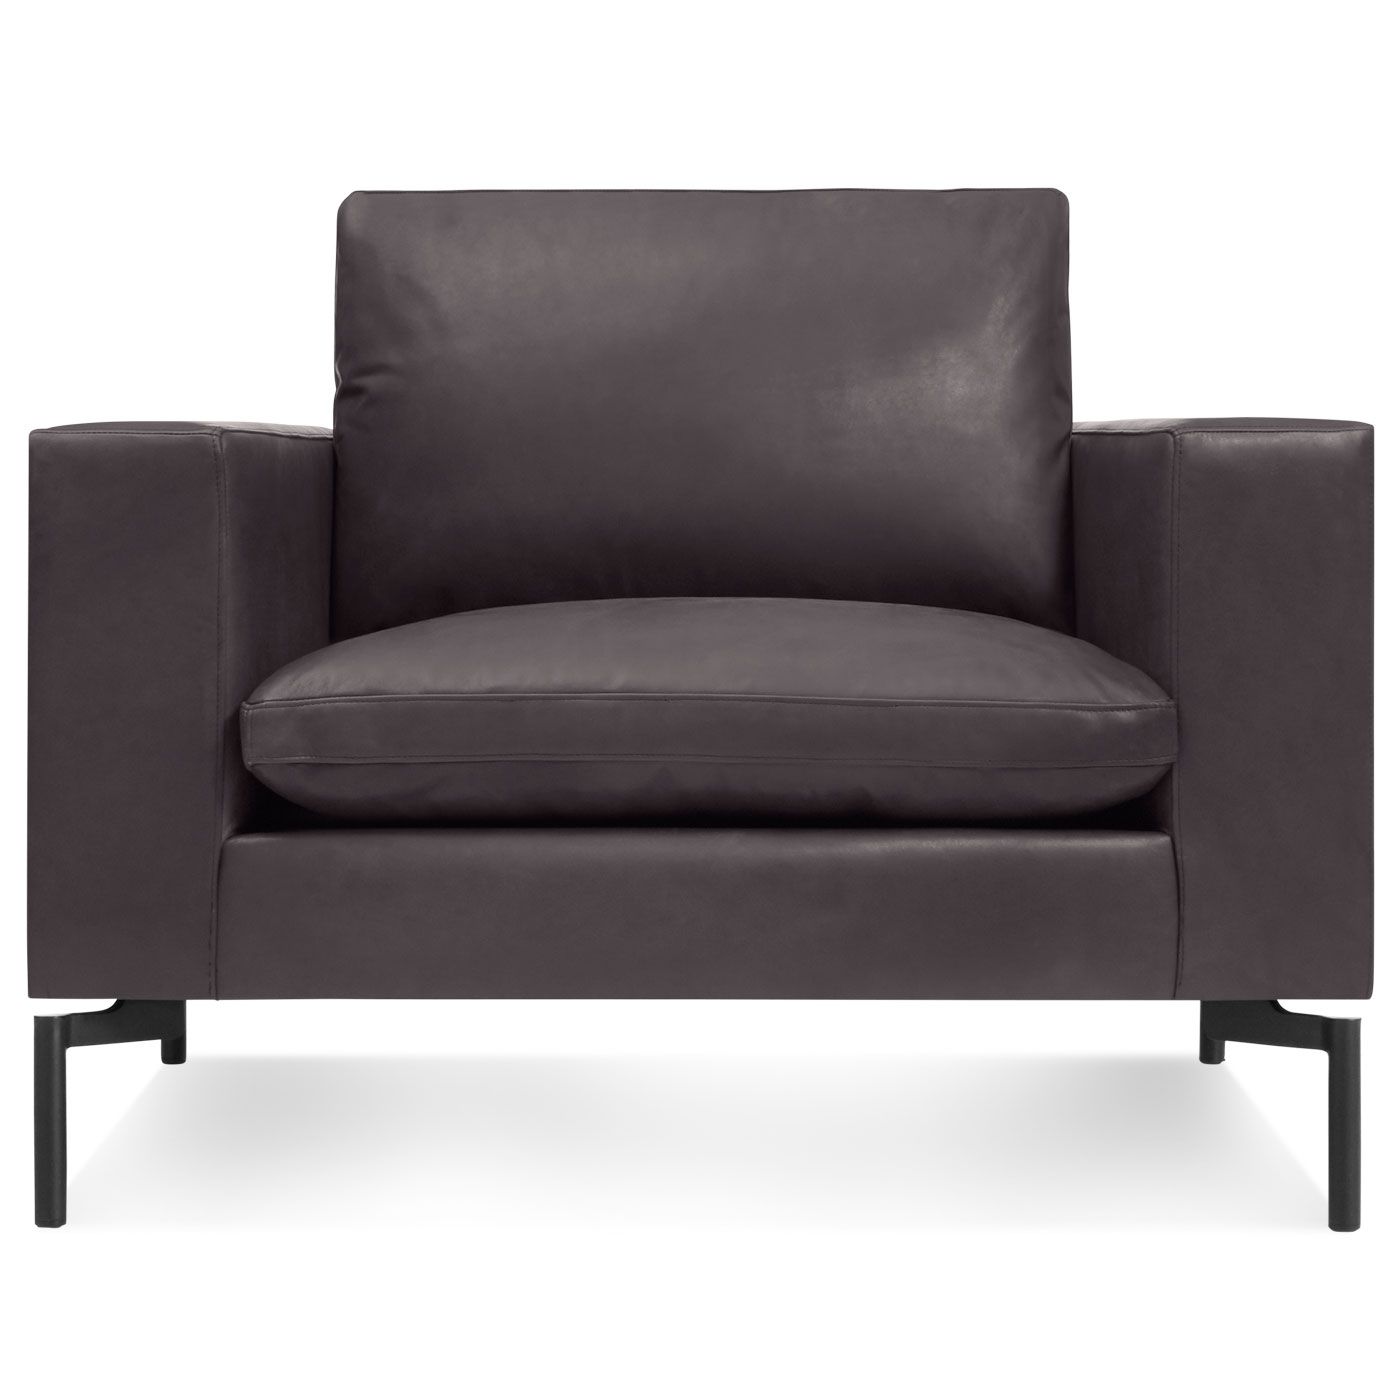 New Standard Modern Leather Lounge Chair Blu Dot With Lounge Sofas And Chairs (View 7 of 15)